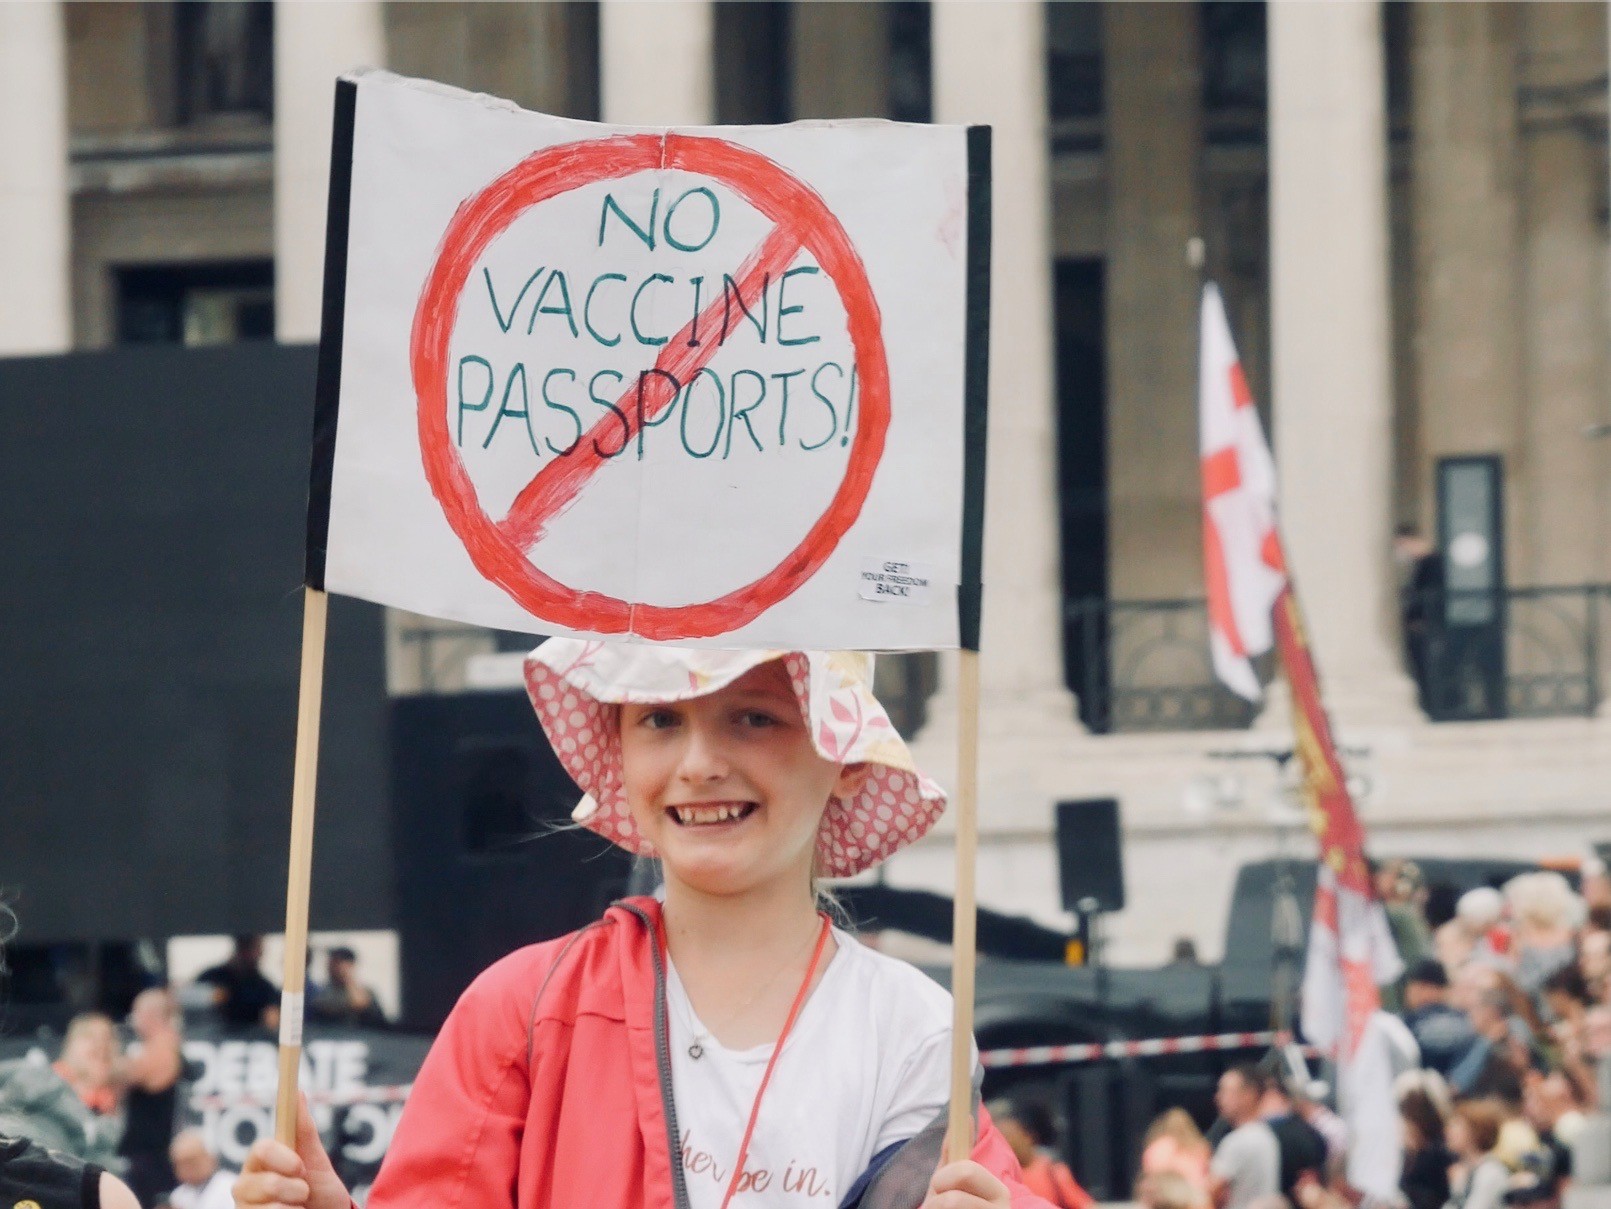 A child holds a placard reading "No Vaccine Passports" at the Freedom Rally in London's Trafalgar Square, July 24th, 2021. Kurt Zindulka, Breitbart News